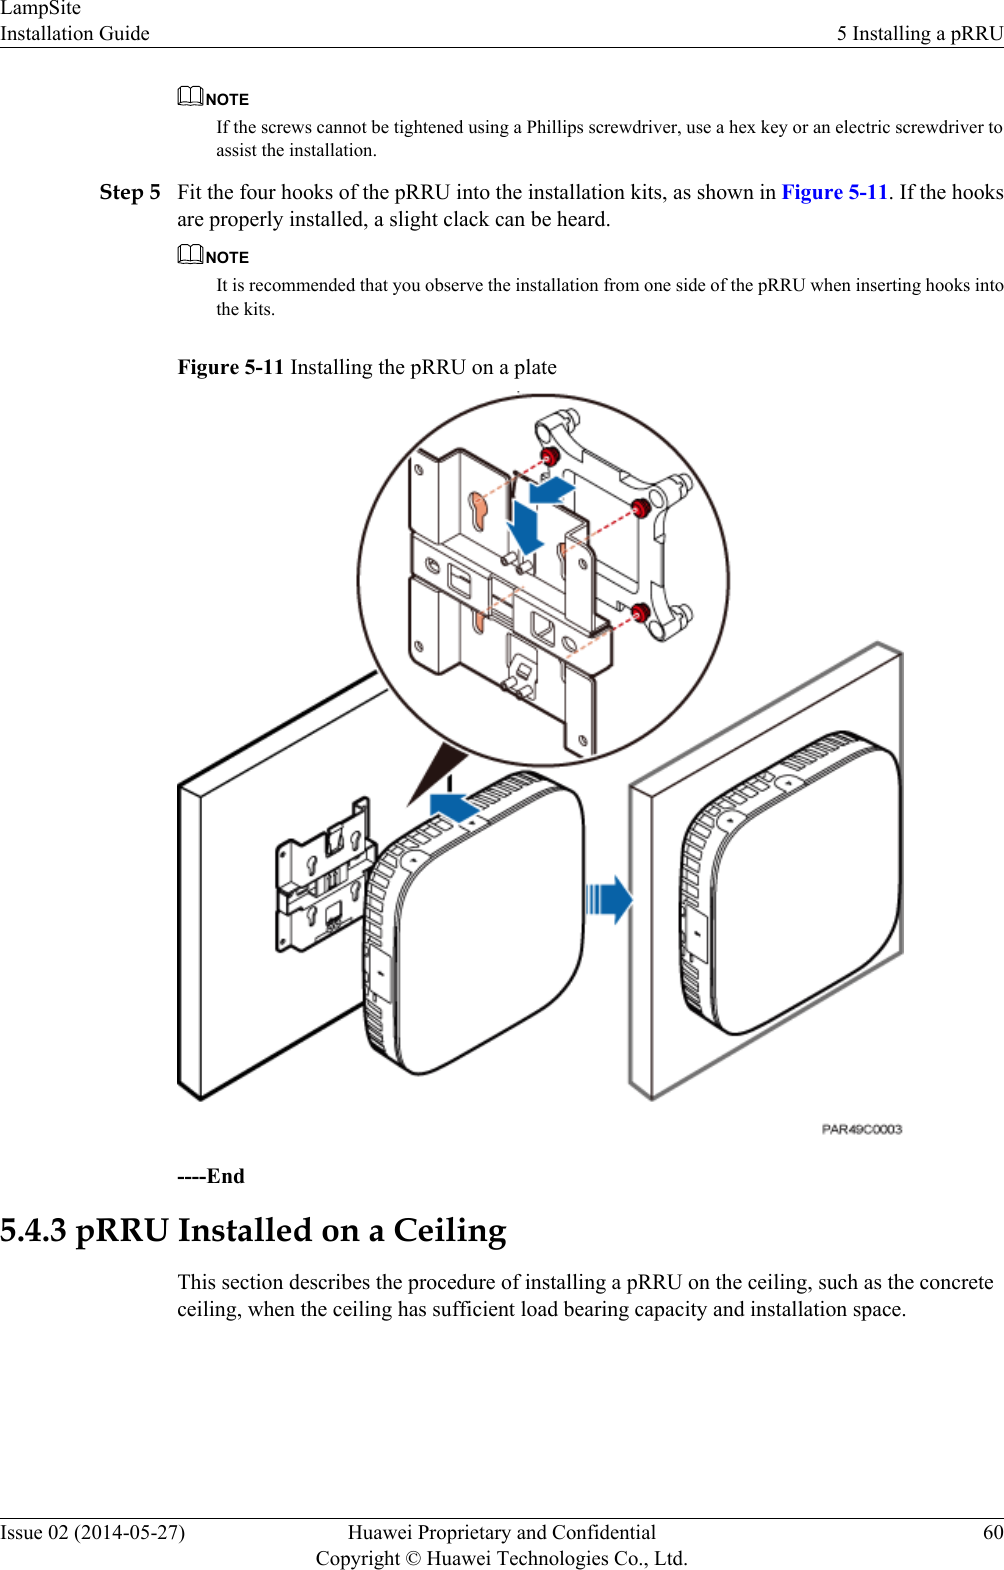 NOTEIf the screws cannot be tightened using a Phillips screwdriver, use a hex key or an electric screwdriver toassist the installation.Step 5 Fit the four hooks of the pRRU into the installation kits, as shown in Figure 5-11. If the hooksare properly installed, a slight clack can be heard.NOTEIt is recommended that you observe the installation from one side of the pRRU when inserting hooks intothe kits.Figure 5-11 Installing the pRRU on a plate----End5.4.3 pRRU Installed on a CeilingThis section describes the procedure of installing a pRRU on the ceiling, such as the concreteceiling, when the ceiling has sufficient load bearing capacity and installation space.LampSiteInstallation Guide 5 Installing a pRRUIssue 02 (2014-05-27) Huawei Proprietary and ConfidentialCopyright © Huawei Technologies Co., Ltd.60